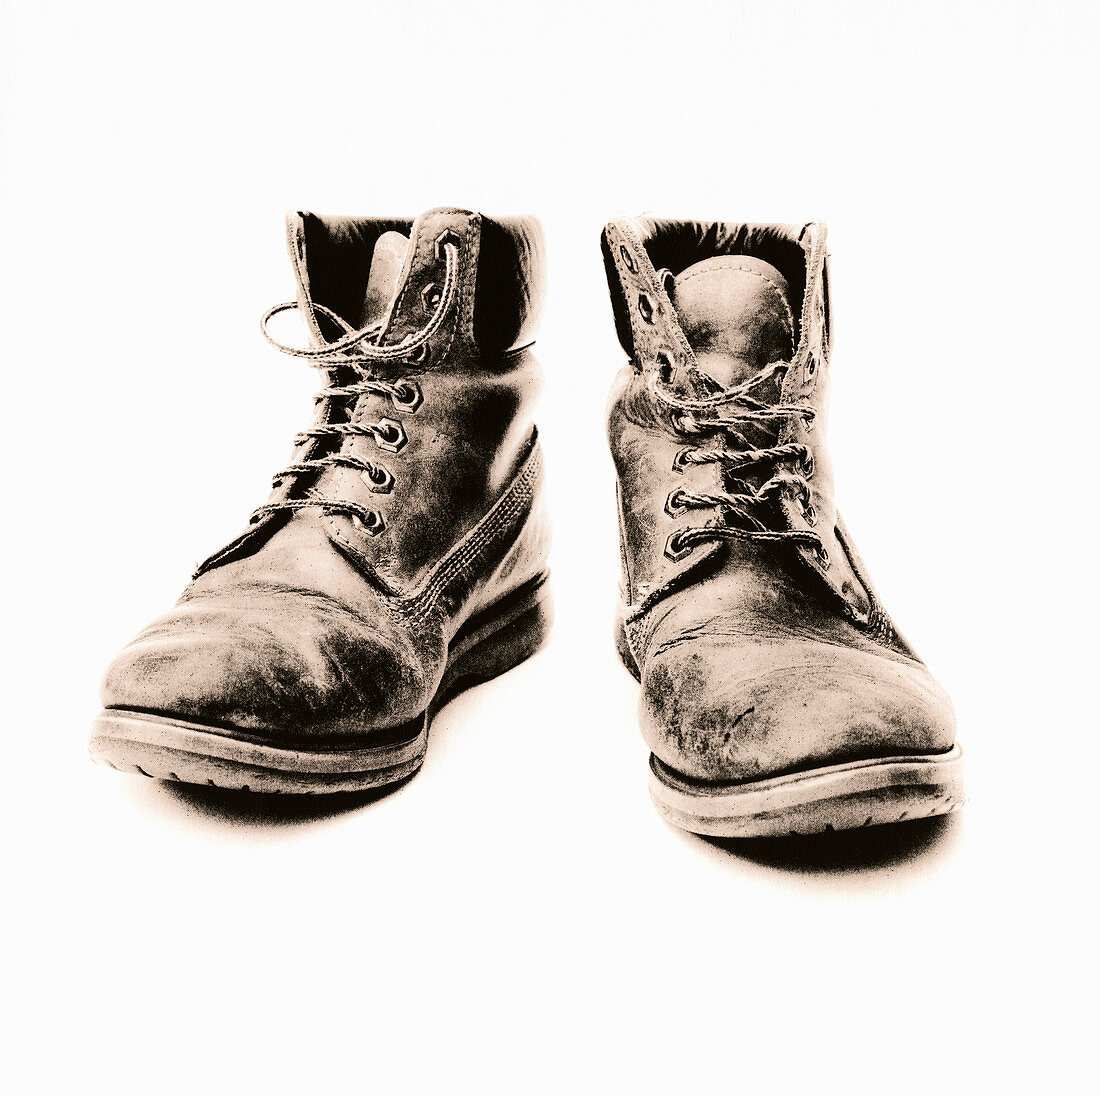 Worker's boots